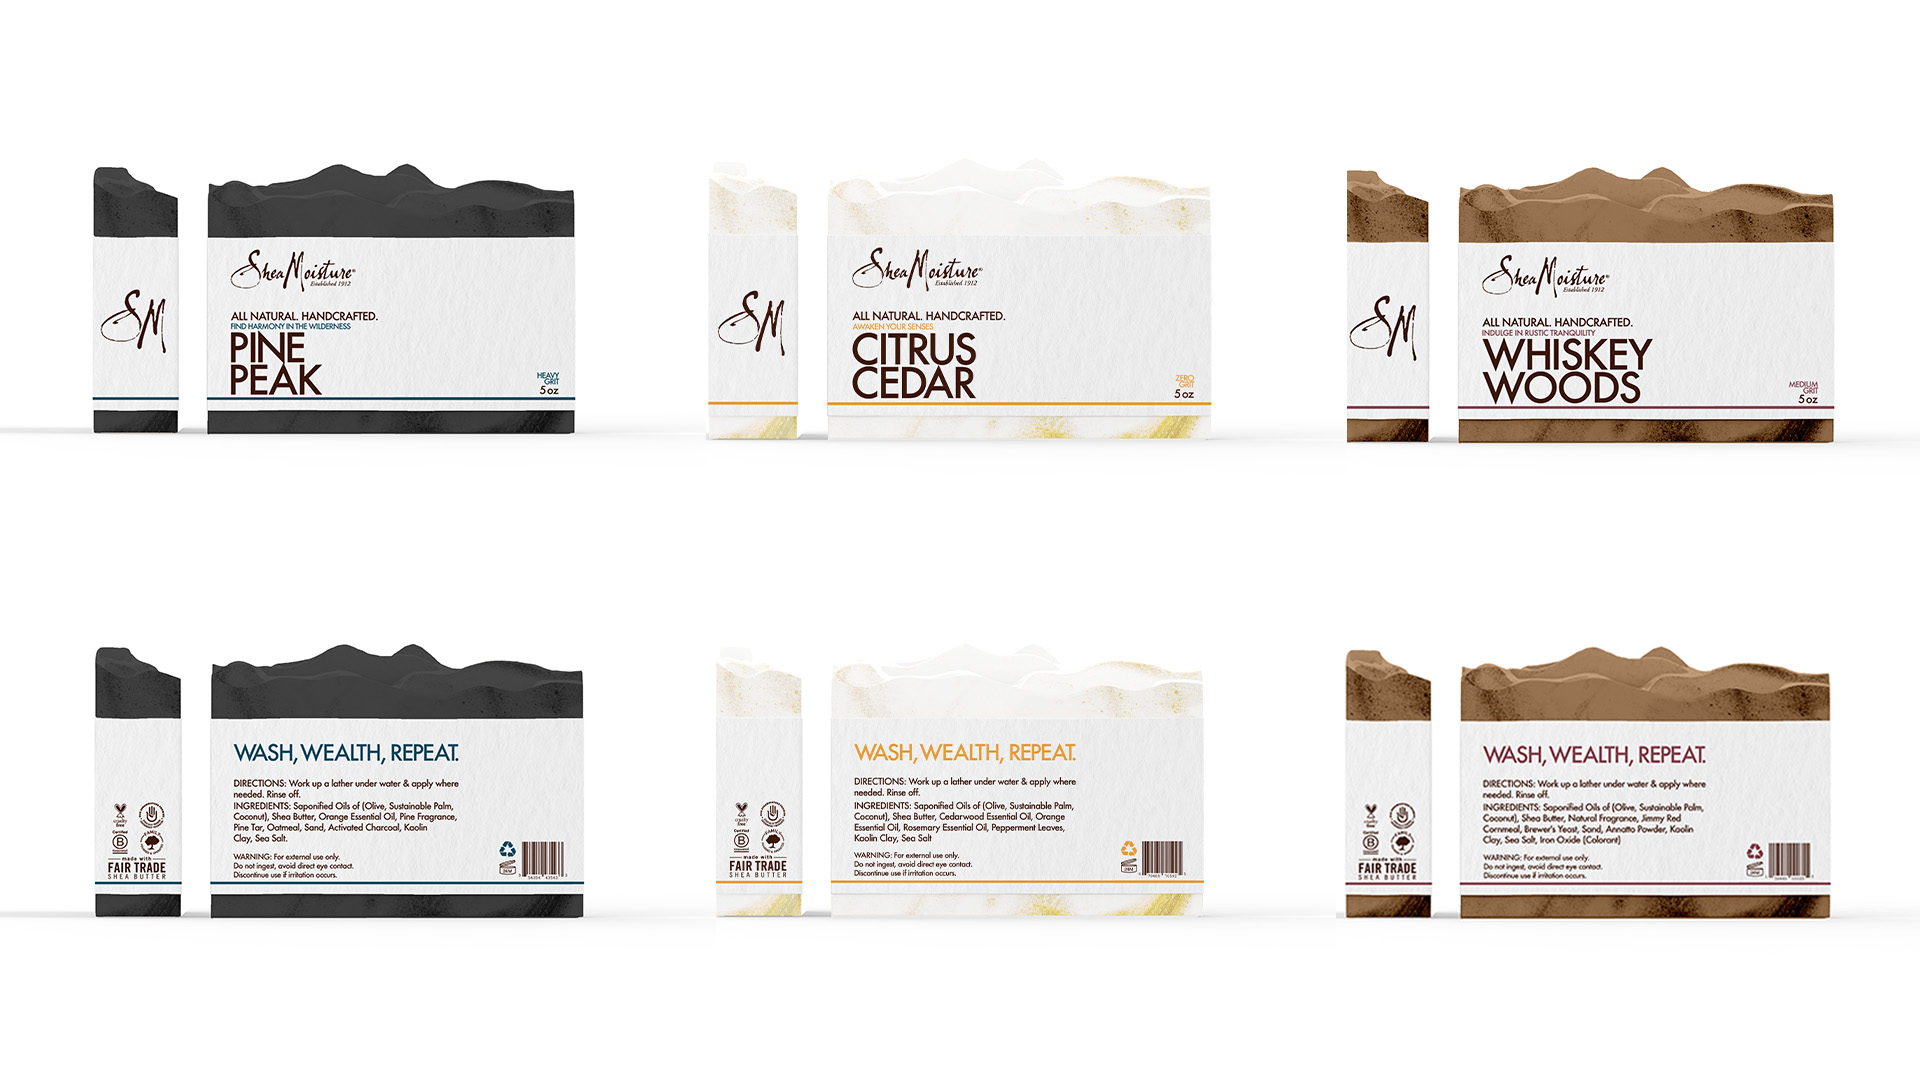 Shea Moisture Organic Rebrand / "Shea Moisture Organic Rebrand," Branding and Packaging Design, 2023. This project aimed to rebrand soap into an all-natural and organic product from an already existing brand. Taking the assets from Shea Moisture, this package redesign is a fully sustain